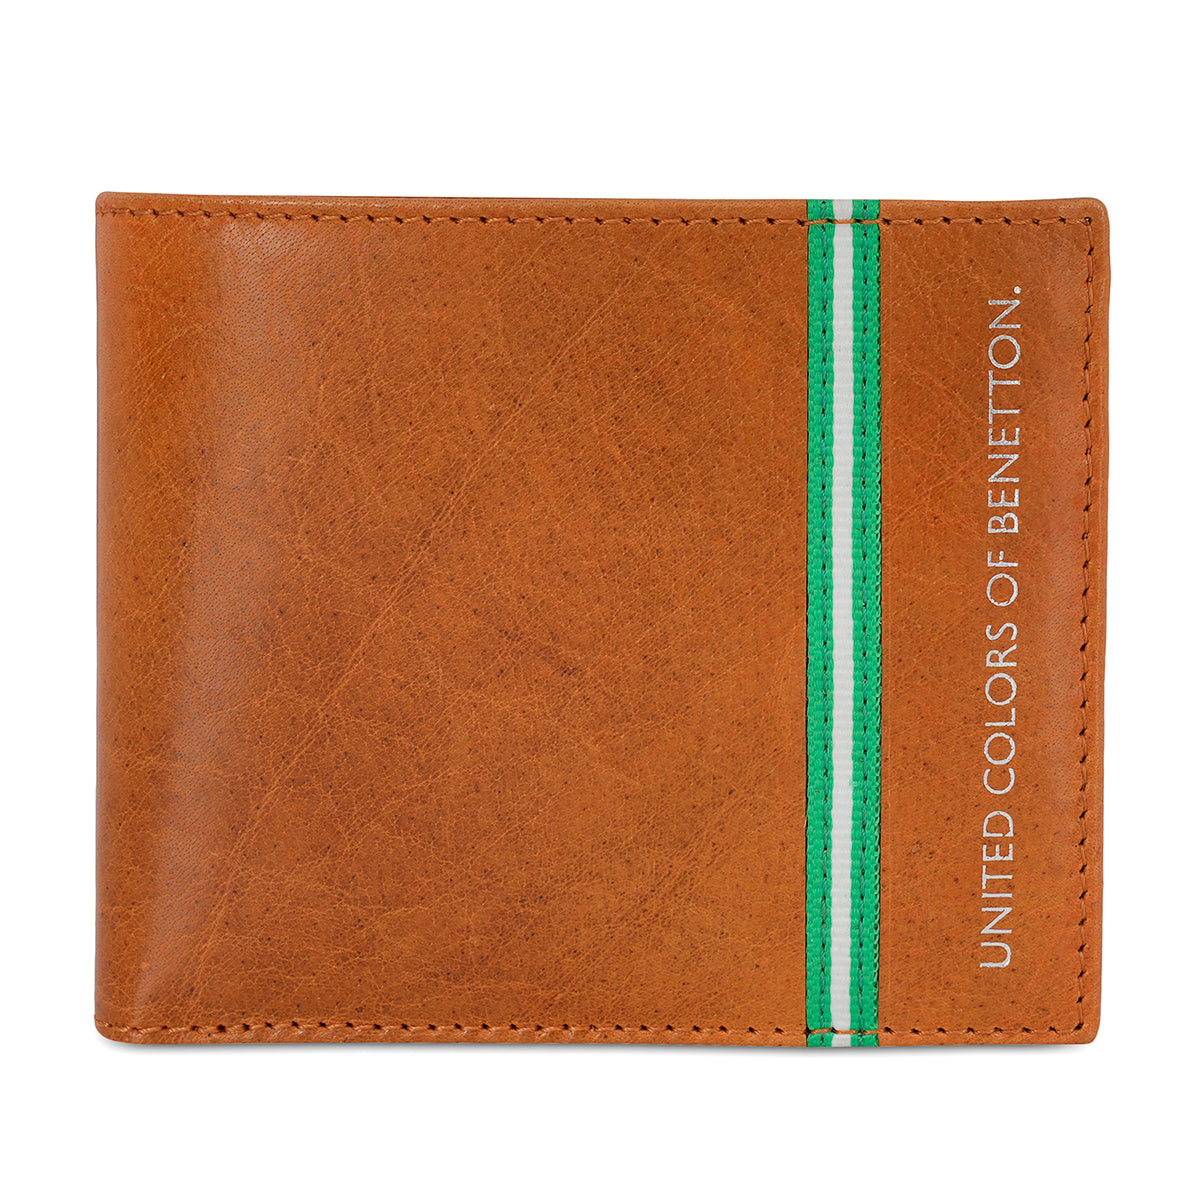 United Colors of Benetton Natalio Global Coin Wallet Tan